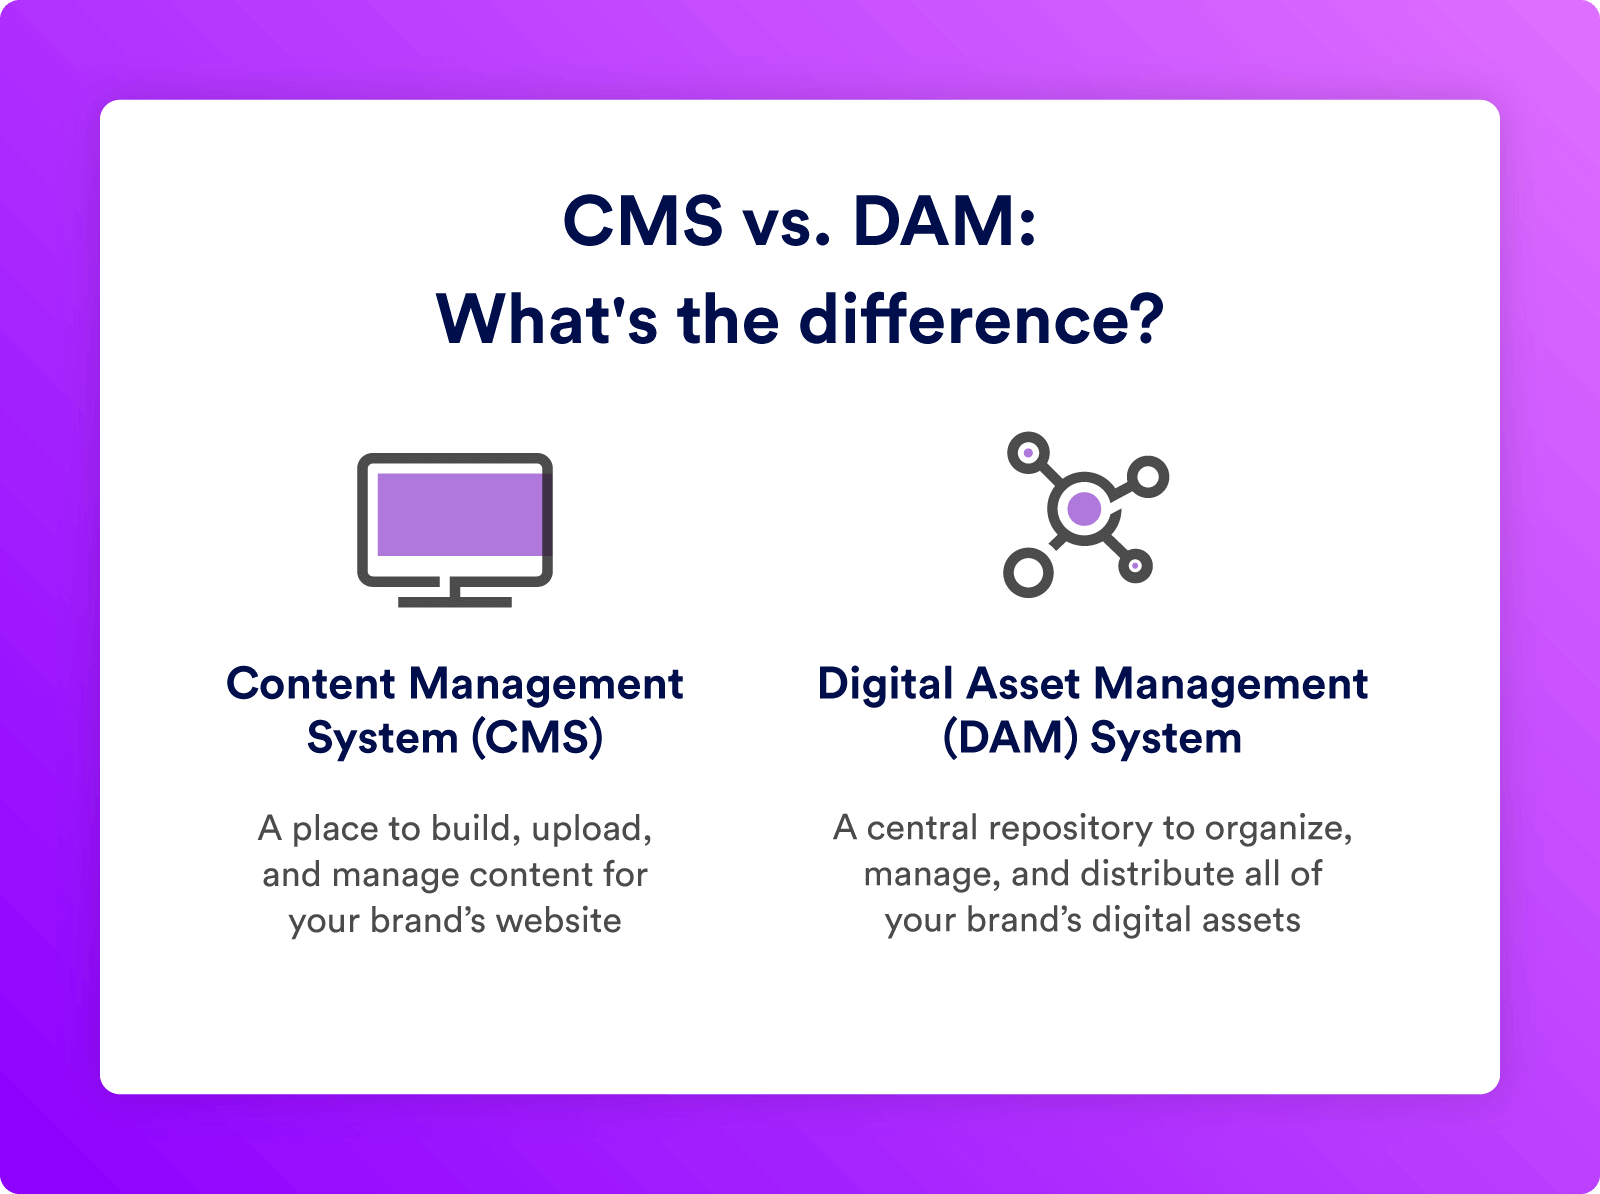 A CMS vs. DAM and their main differences